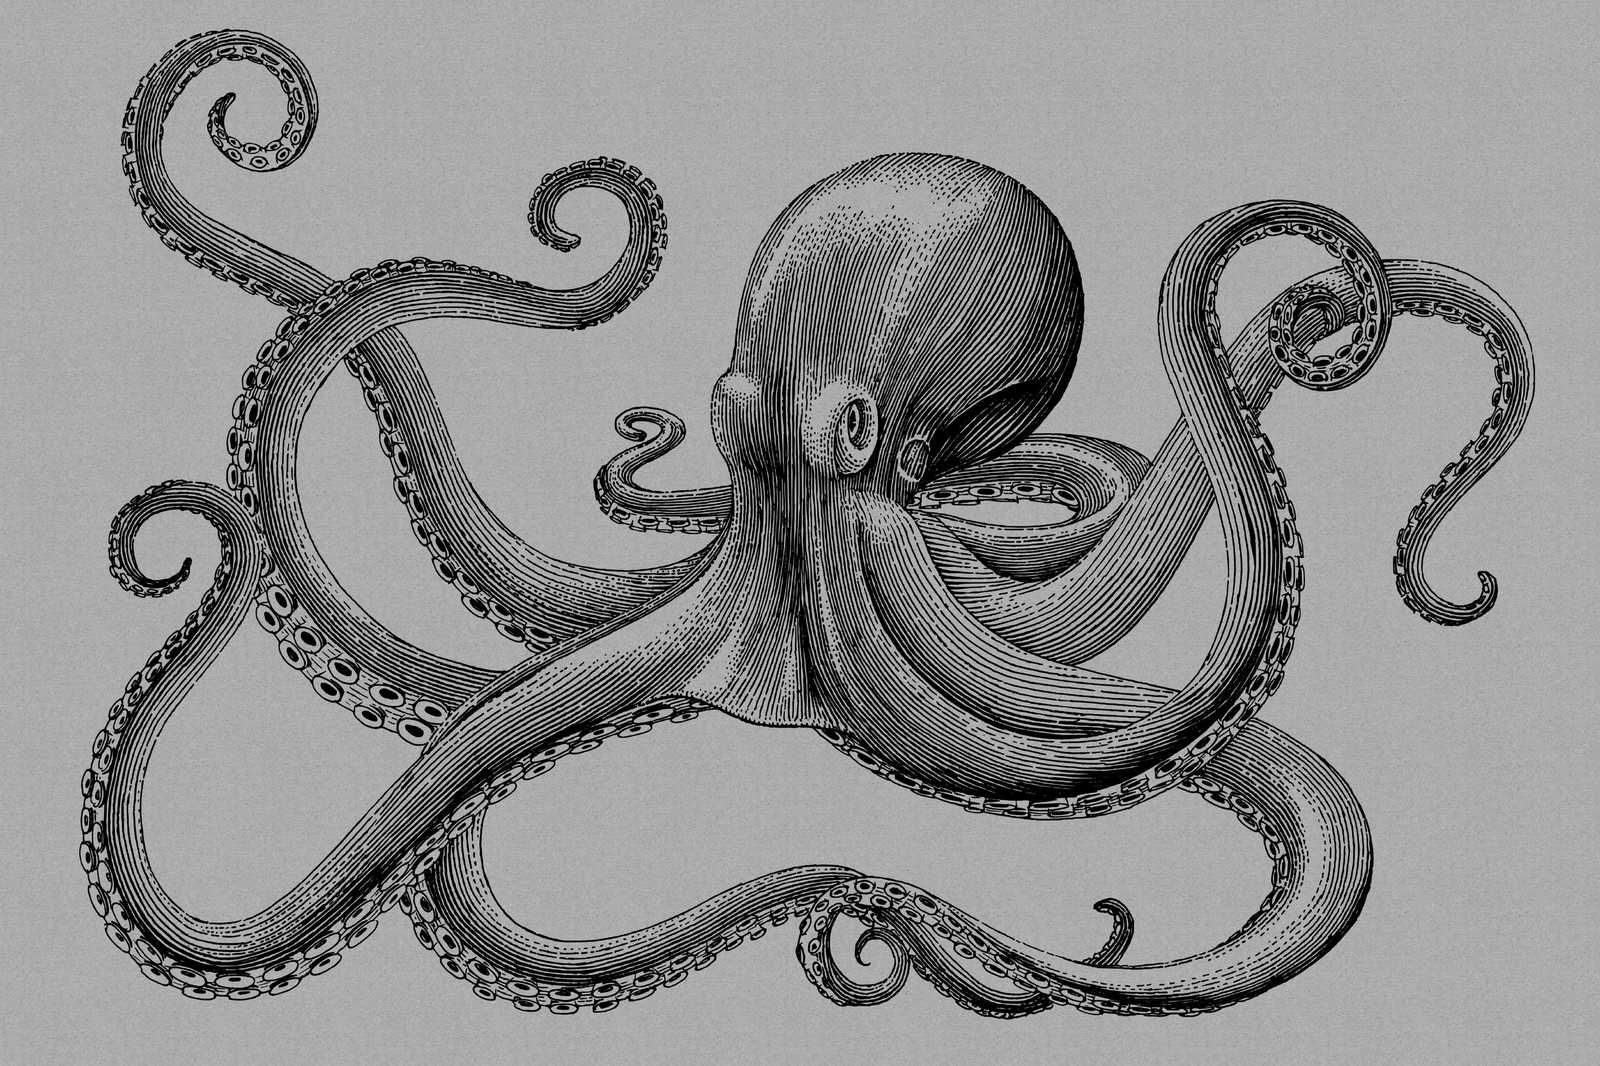             Jules 2 - Modern Octopus Drawing Style Canvas Painting - 1.20 m x 0.80 m
        